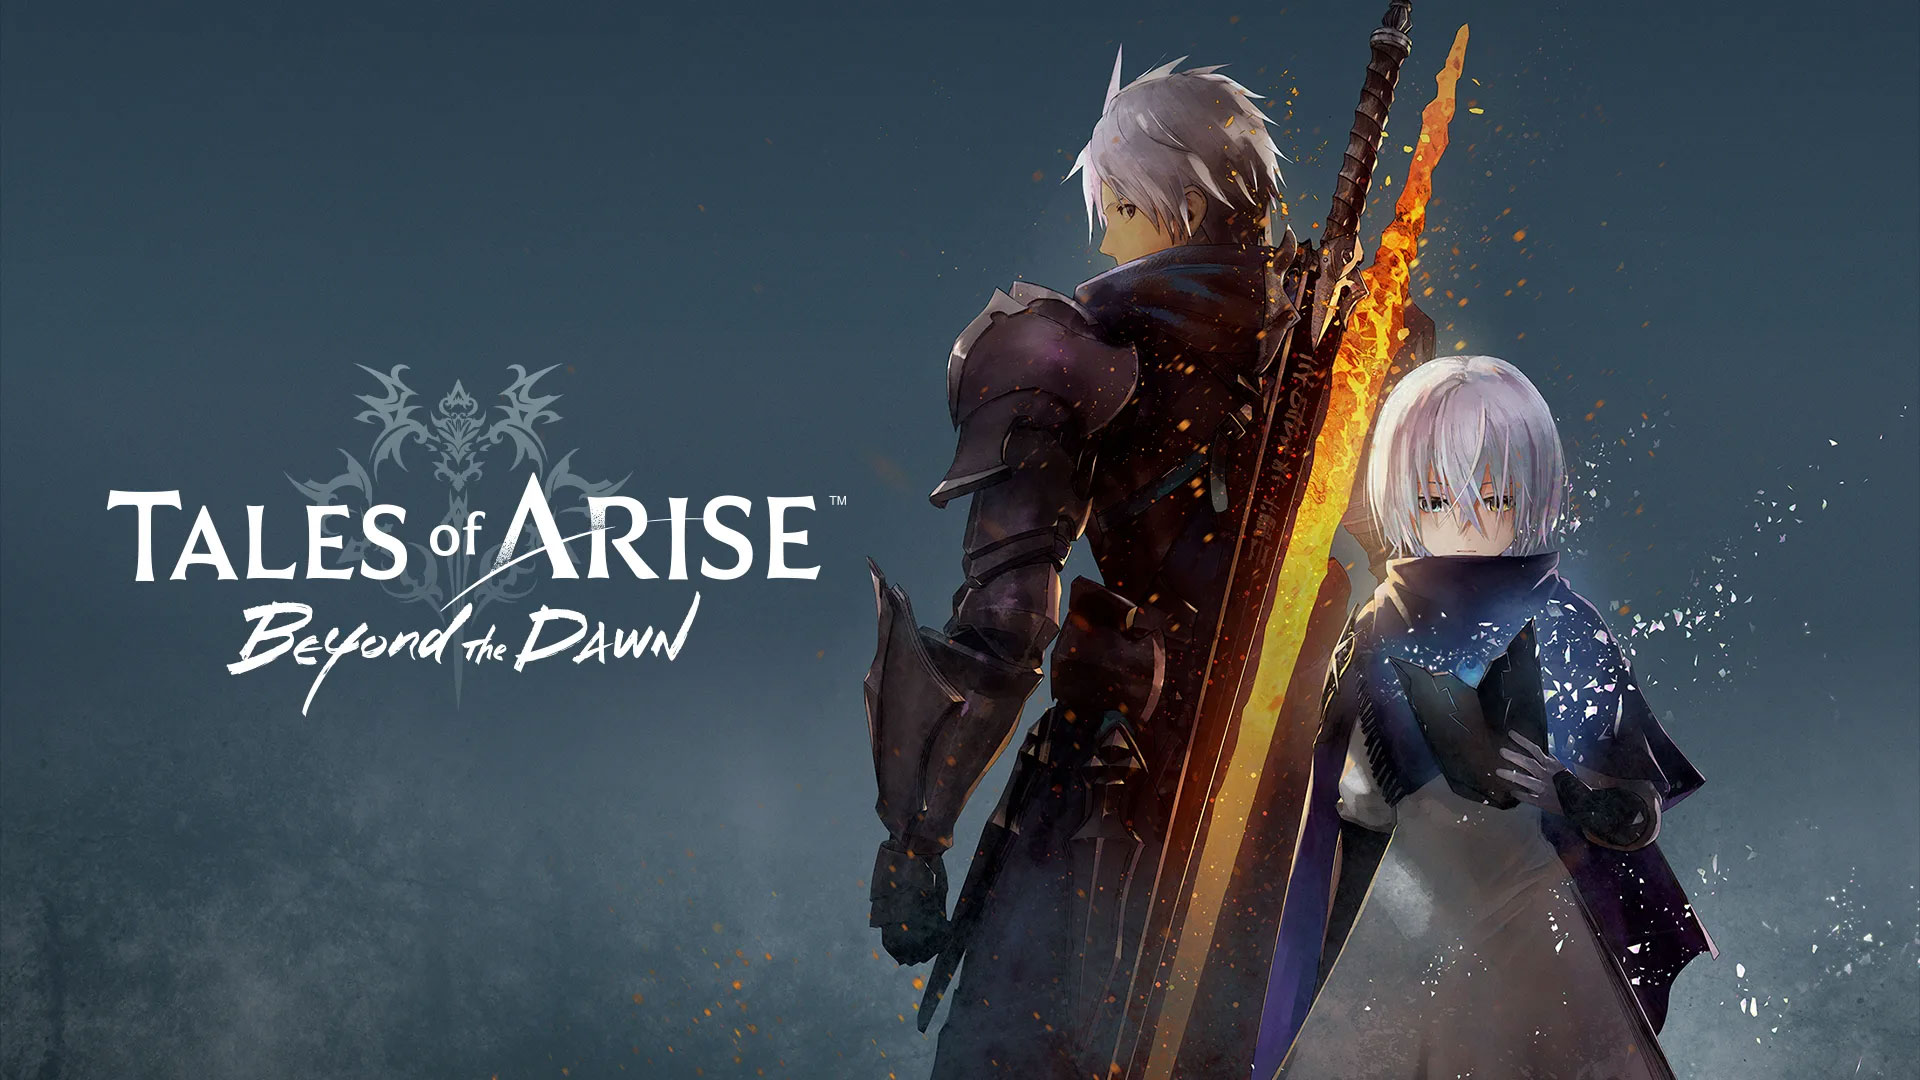 Tales of Arise is getting a lengthy story expansion called Beyond the Dawn